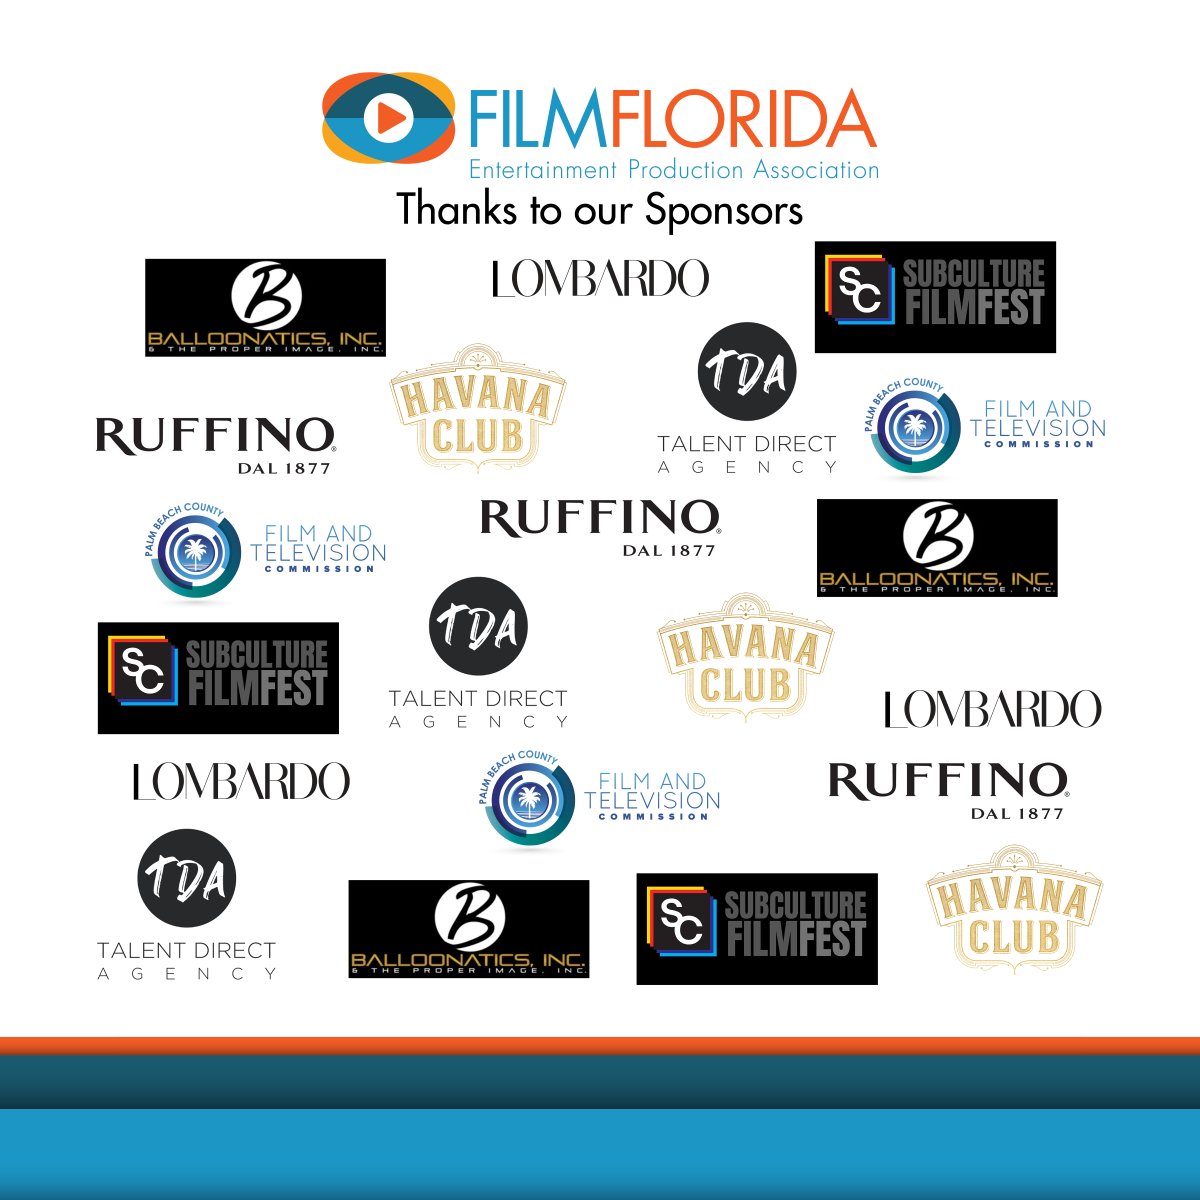 South Florida friends, join us for a special Film Florida 25th Anniversary Networking Event, Thursday June 8 at 6pm at the Lombardo Agency in West Palm Beach. Space is limited. 

RSVP at buff.ly/3opi0cA